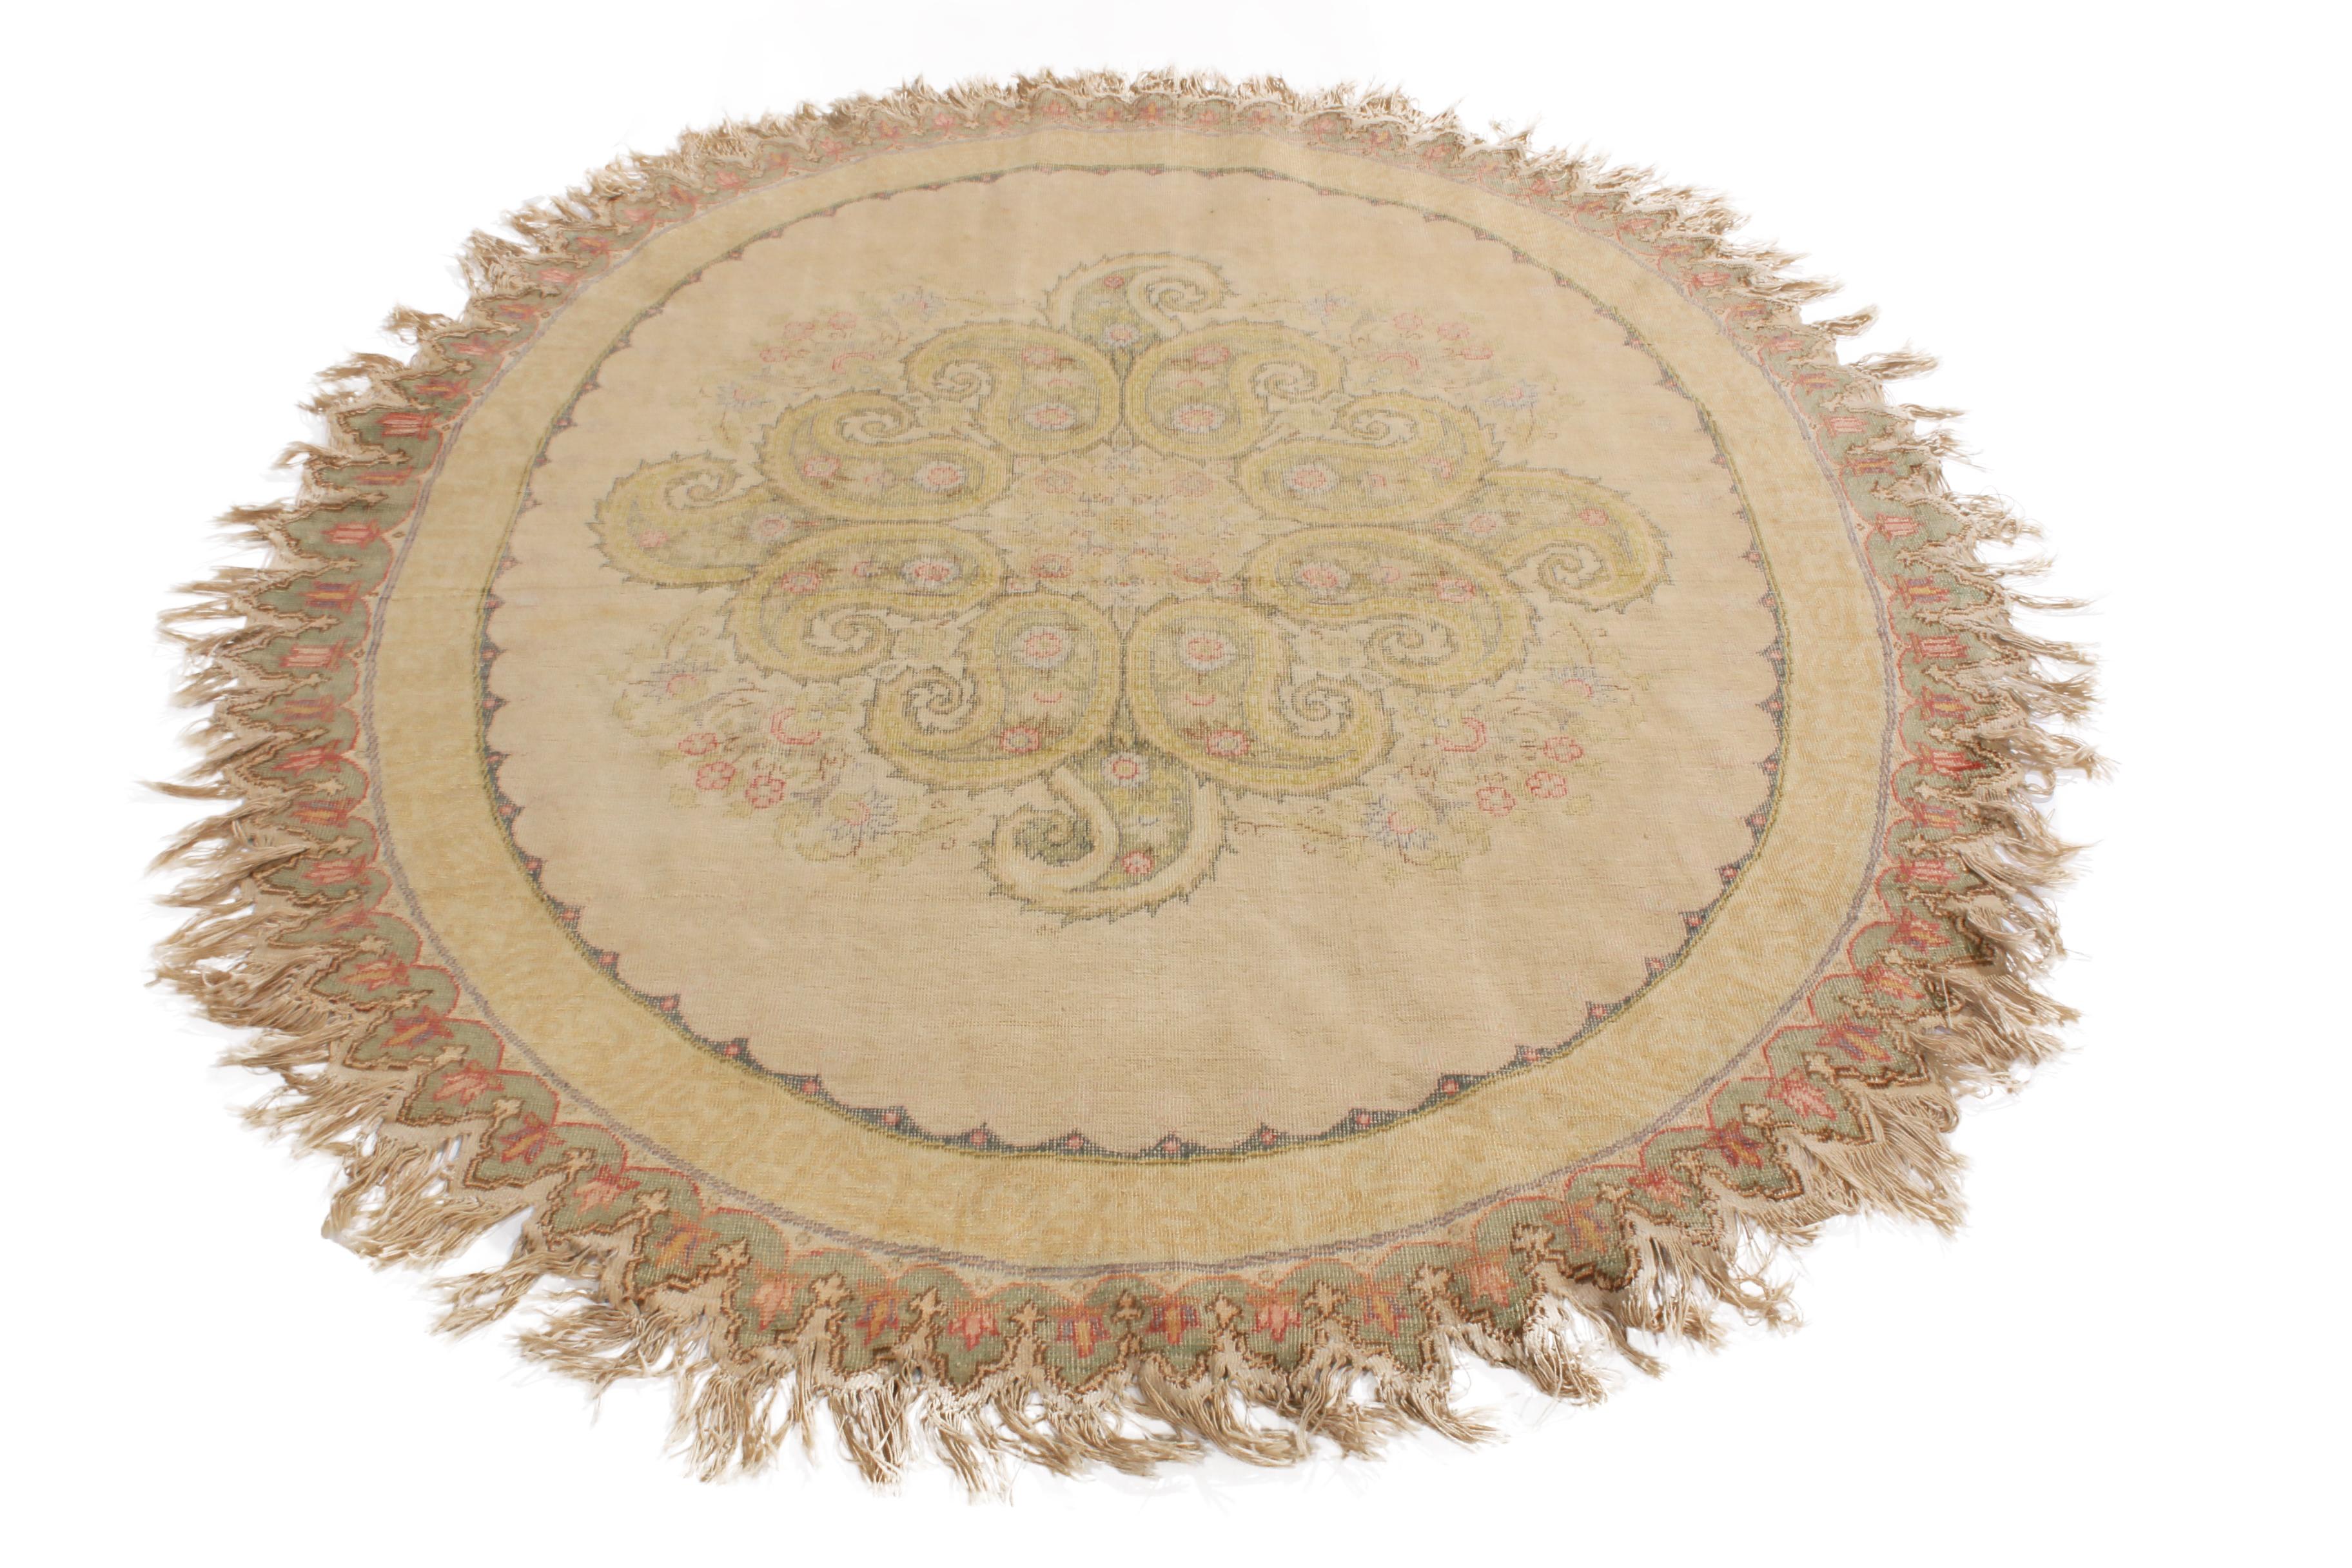 Originating from Turkey between 1930-1950, this vintage Hereke oval rug is hand knotted with a high-quality silk featuring a rare Medallion style field design complementing its shape and spaciousness. Encompassed by a fringe-based guard border